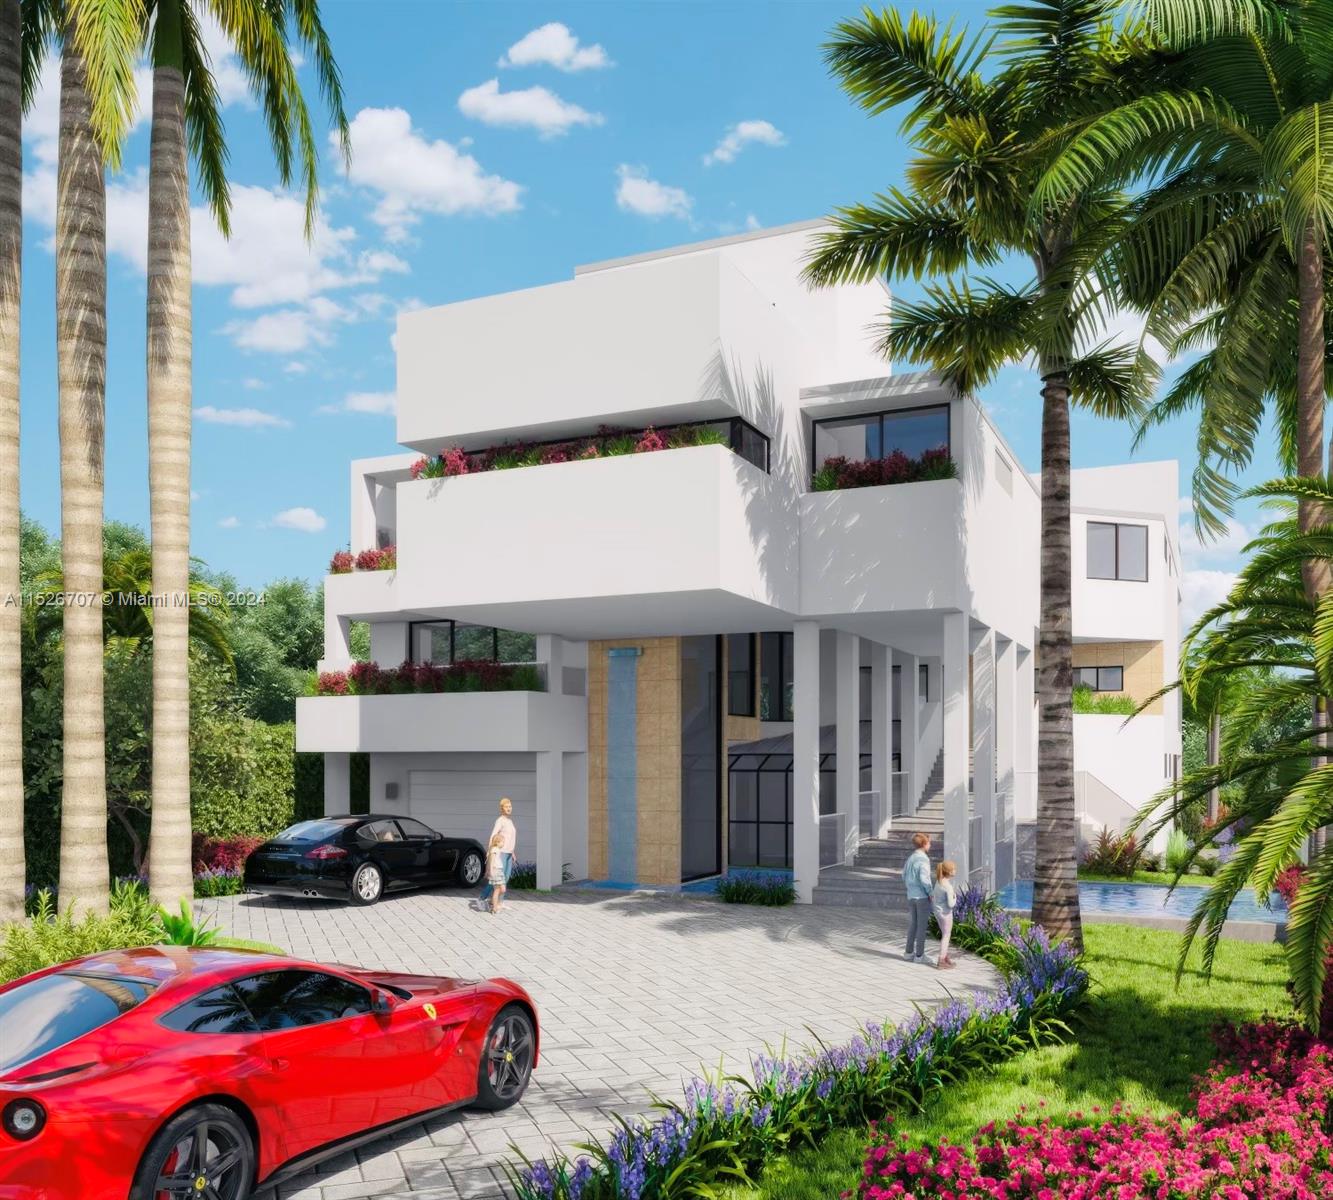 Property for Sale at 279 N Hibiscus Dr, Miami Beach, Miami-Dade County, Florida - Bedrooms: 5 
Bathrooms: 6  - $21,900,000